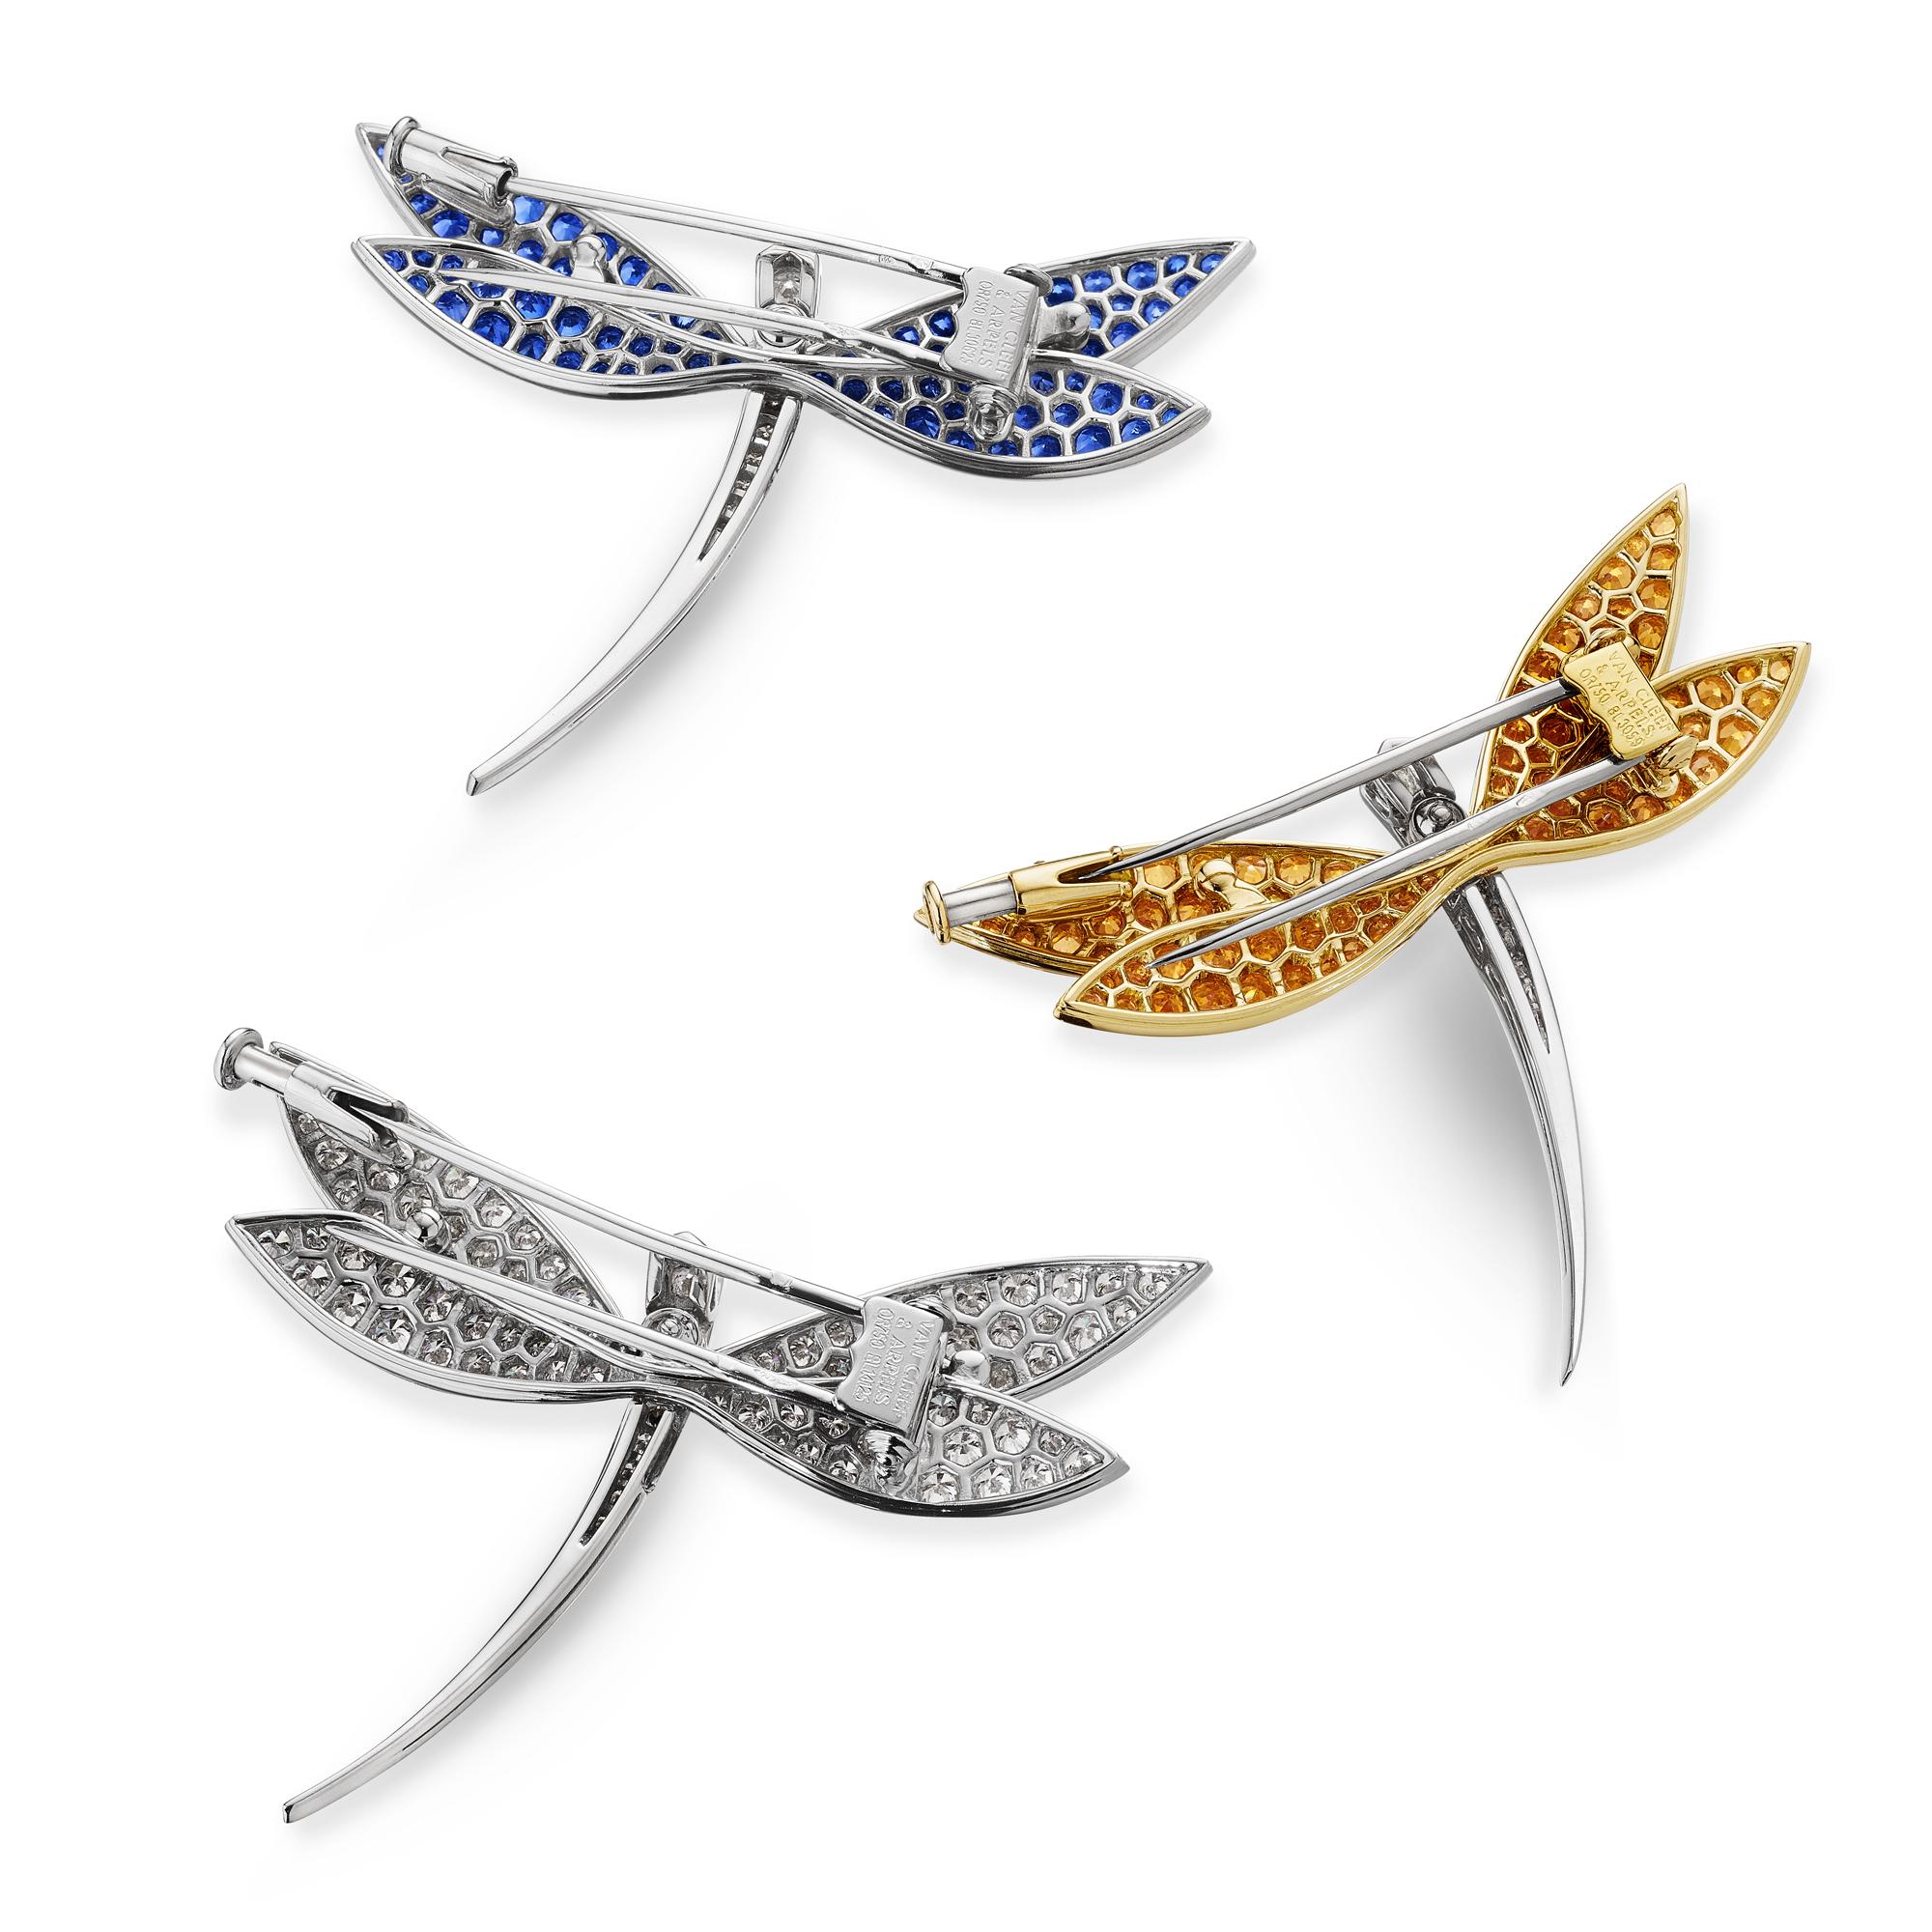 Ephermeral, and illusory, dragonflies have flown the earth for 300 million years and have come to symbolize the ability to overcome times of hardship and are the ultimate omen for good luck.  These three iridescent Van Cleef & Arpels Paris vintage